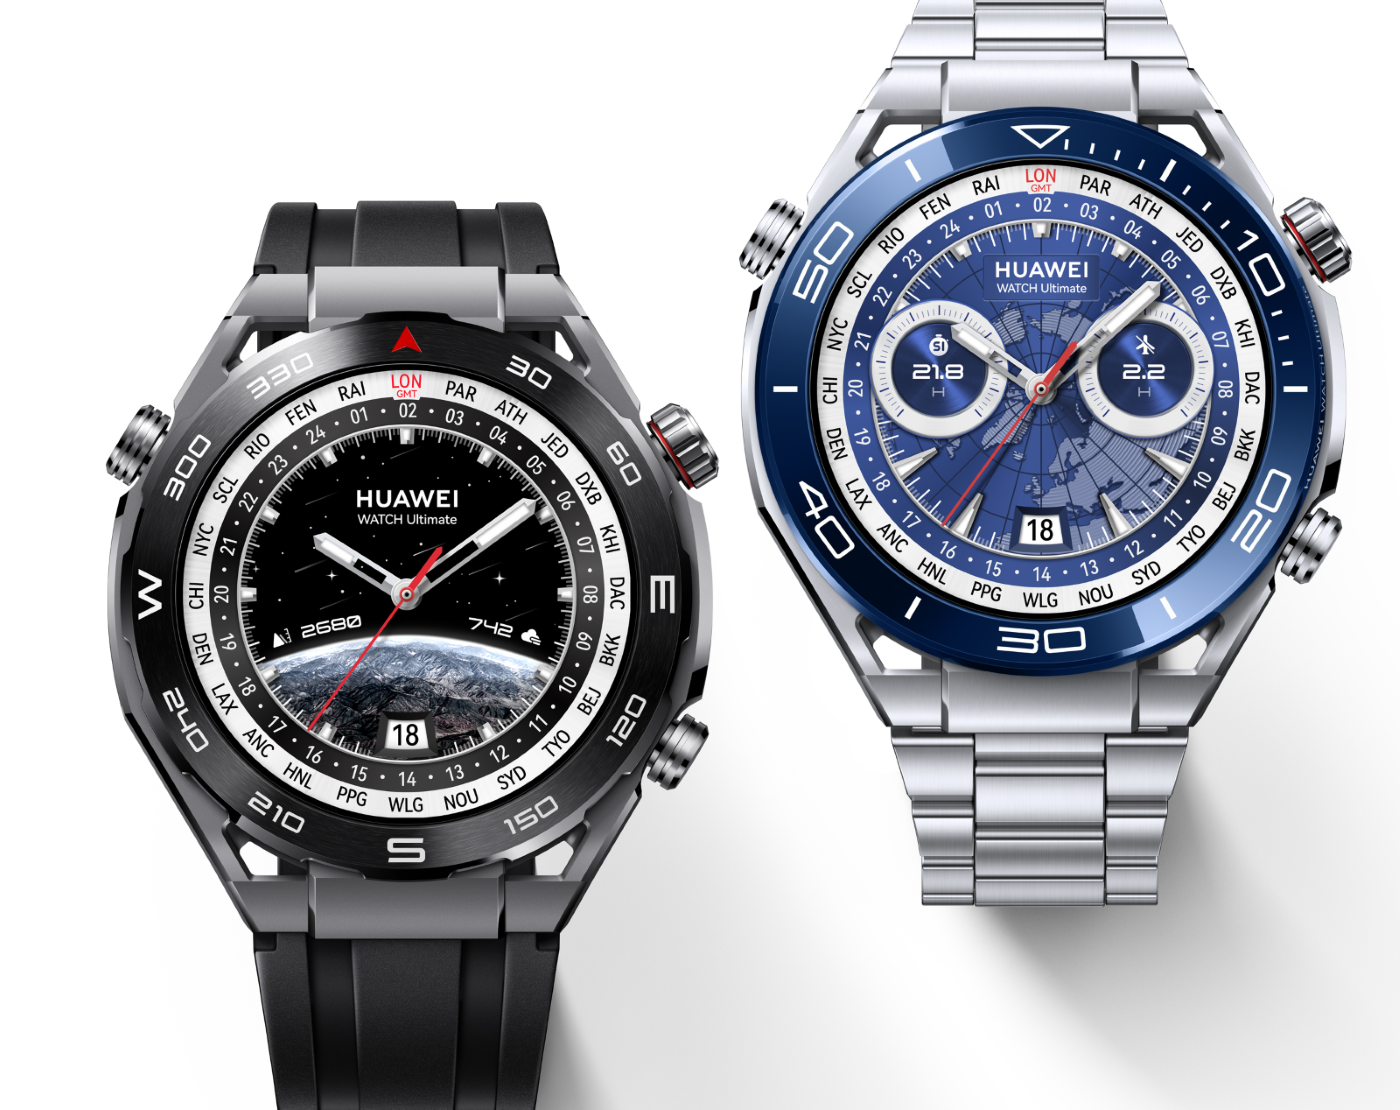 HUAWEI WATCH Ultimate smartwatches and HUAWEI FreeBuds 5 are now available in the UAE